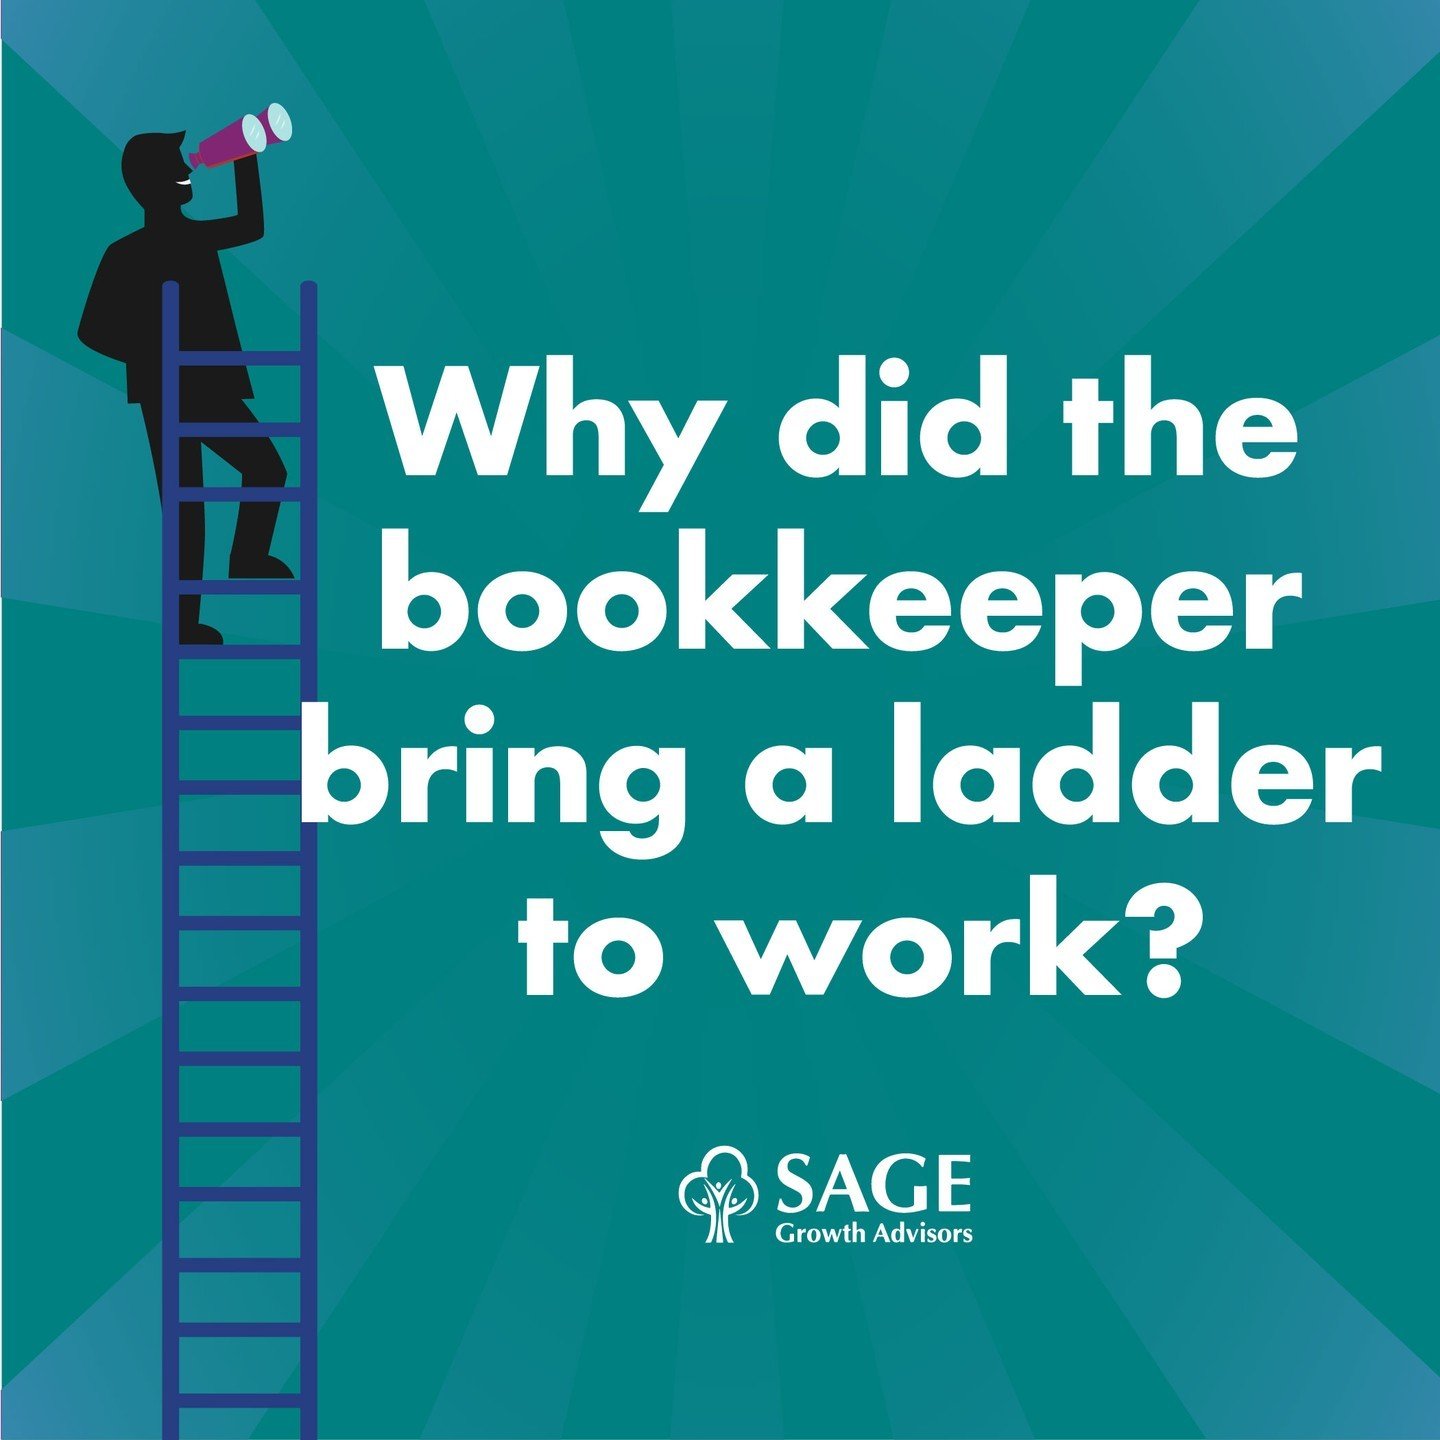 ❓Why did the bookkeeper bring a ladder to work? To balance the books on a higher level!! Oh come on you know you want to laugh!!&hellip;.can you say DAD JOKE!! 😂 

#bookkkeeper #dontquityourdayjob #dadjokes #lol #dad #jokes #funny #laugh #smile #tue